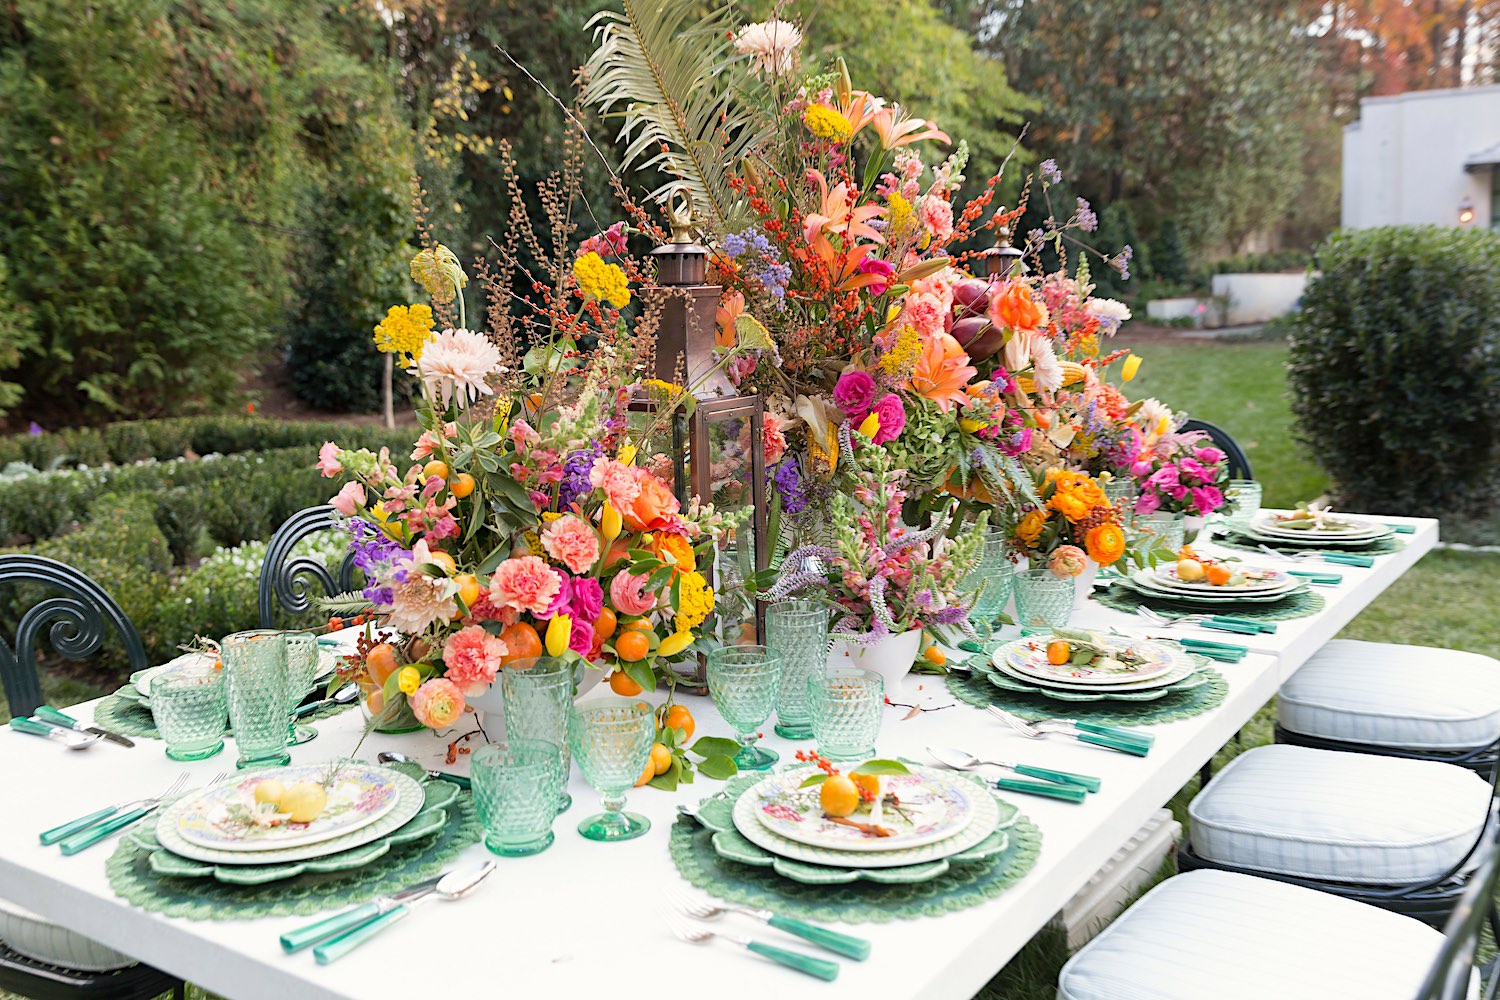 Elaine Griffin tablescape in backyard with Canaan Marshall centerpiece of flower arrangements.